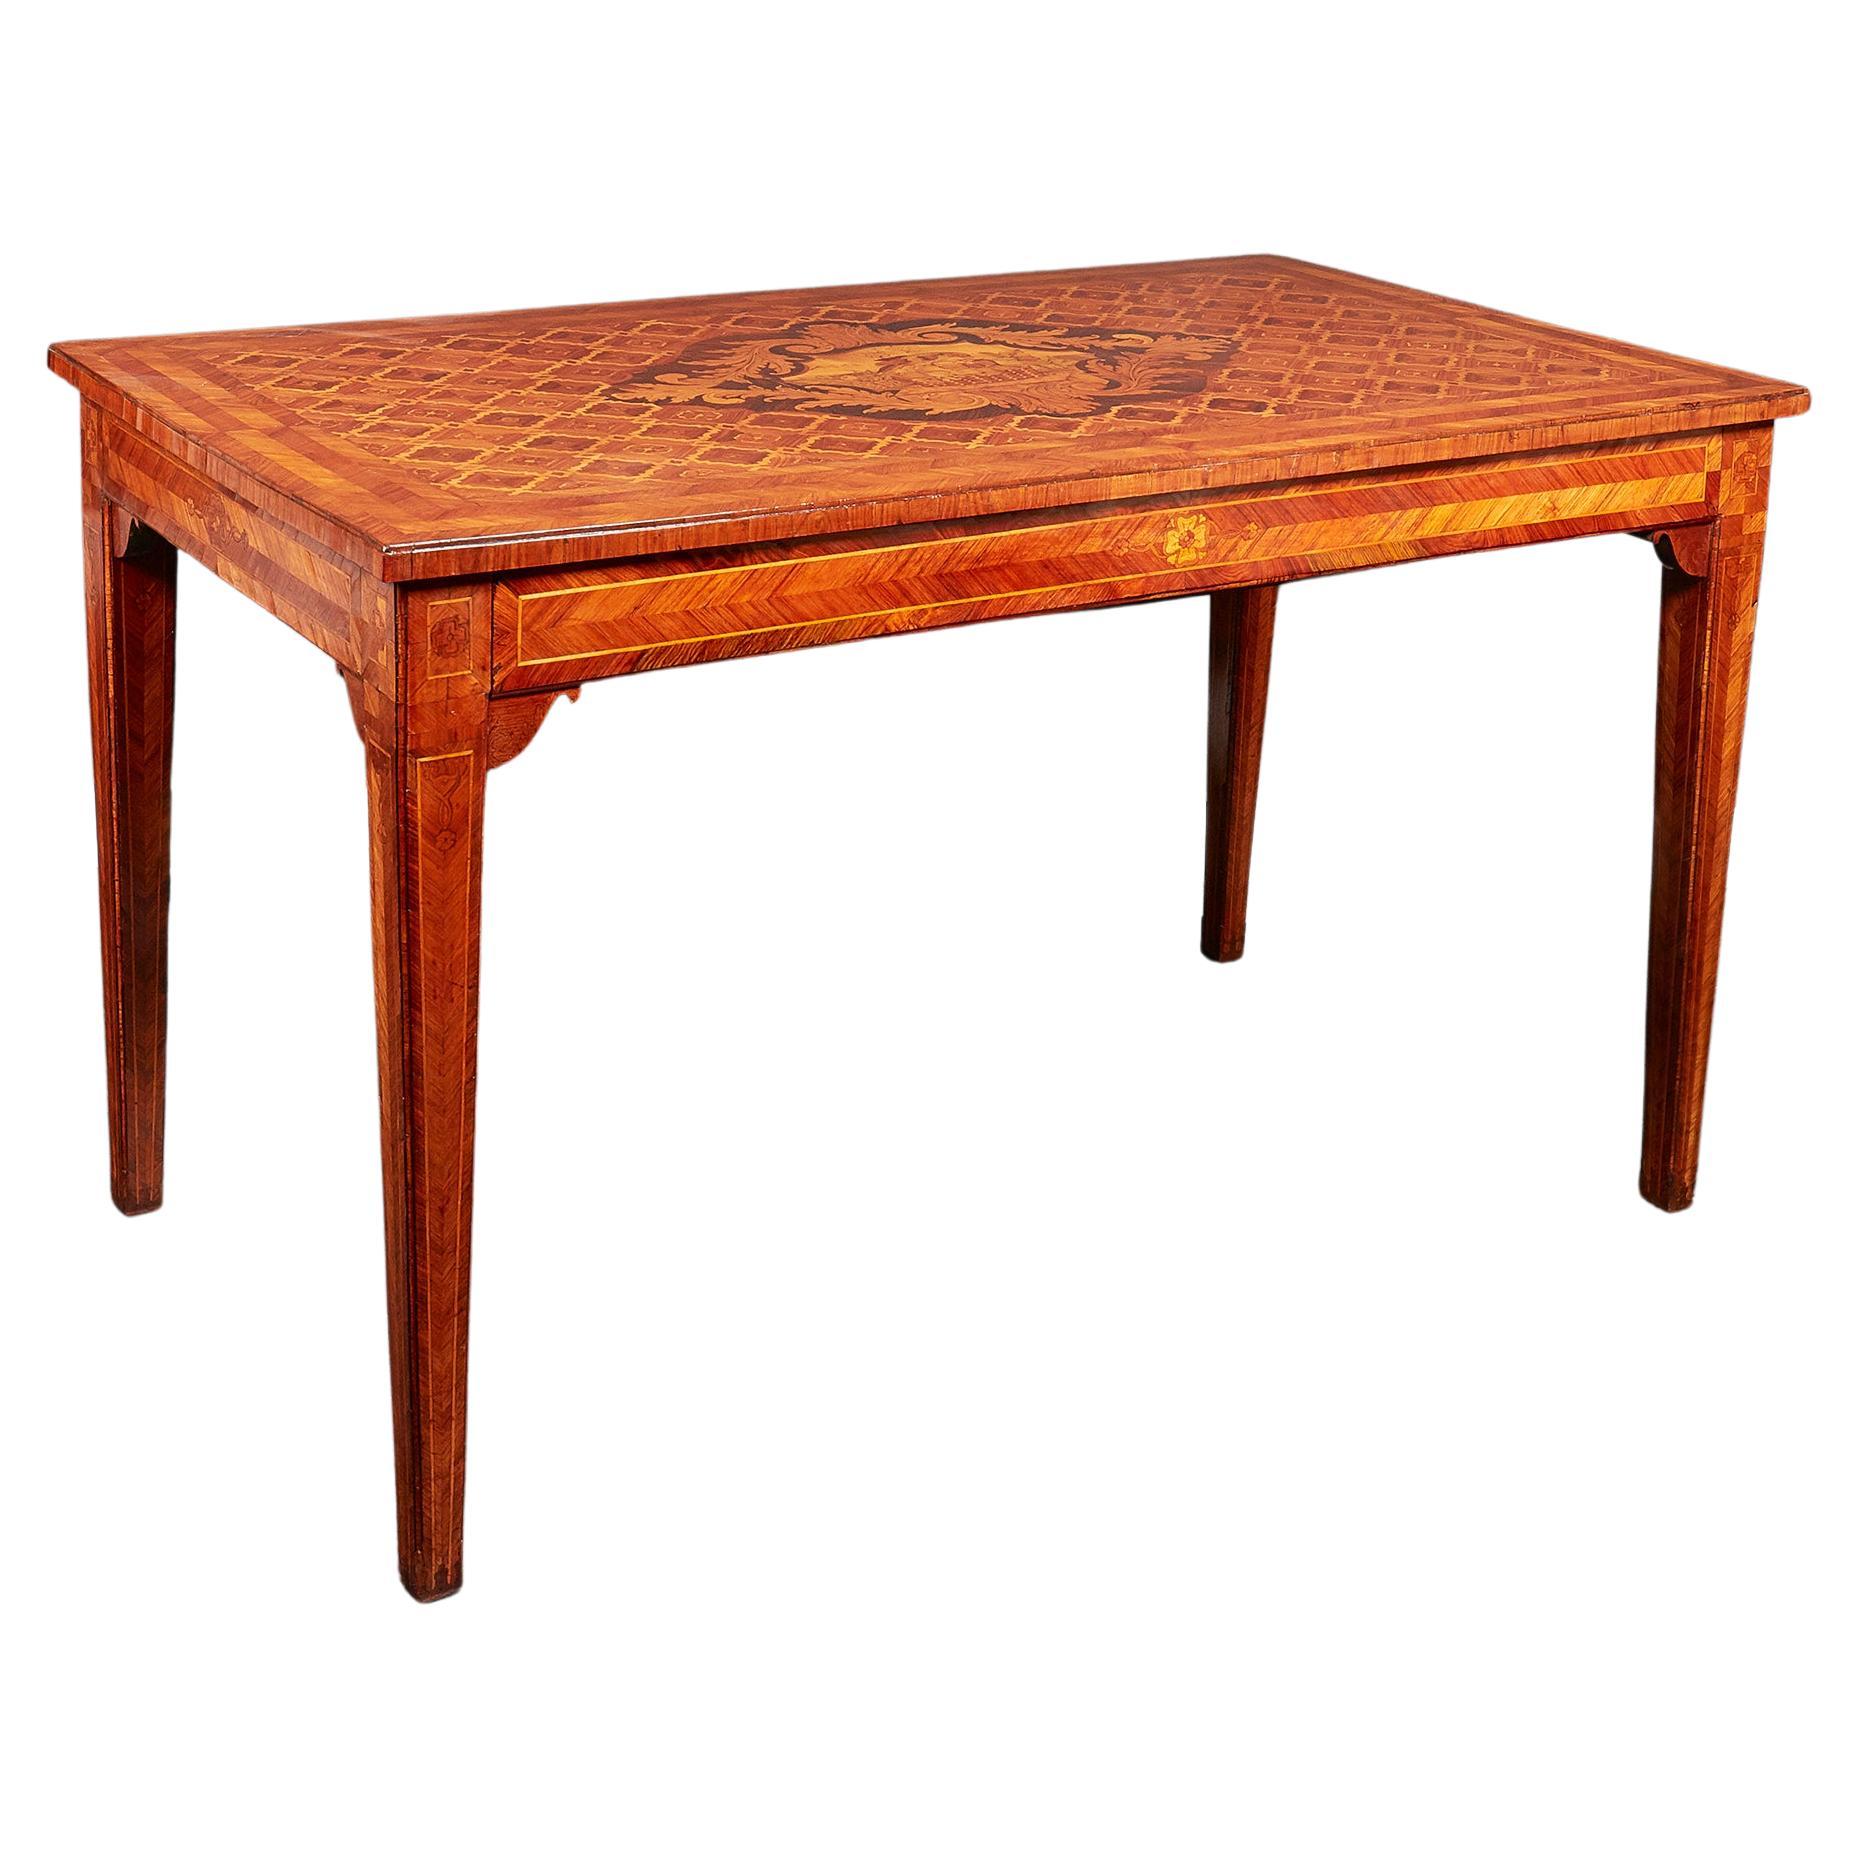 Dutch Walnut, Kingwood and Marquetry Side Table, Late 17th-Early 18th Century For Sale